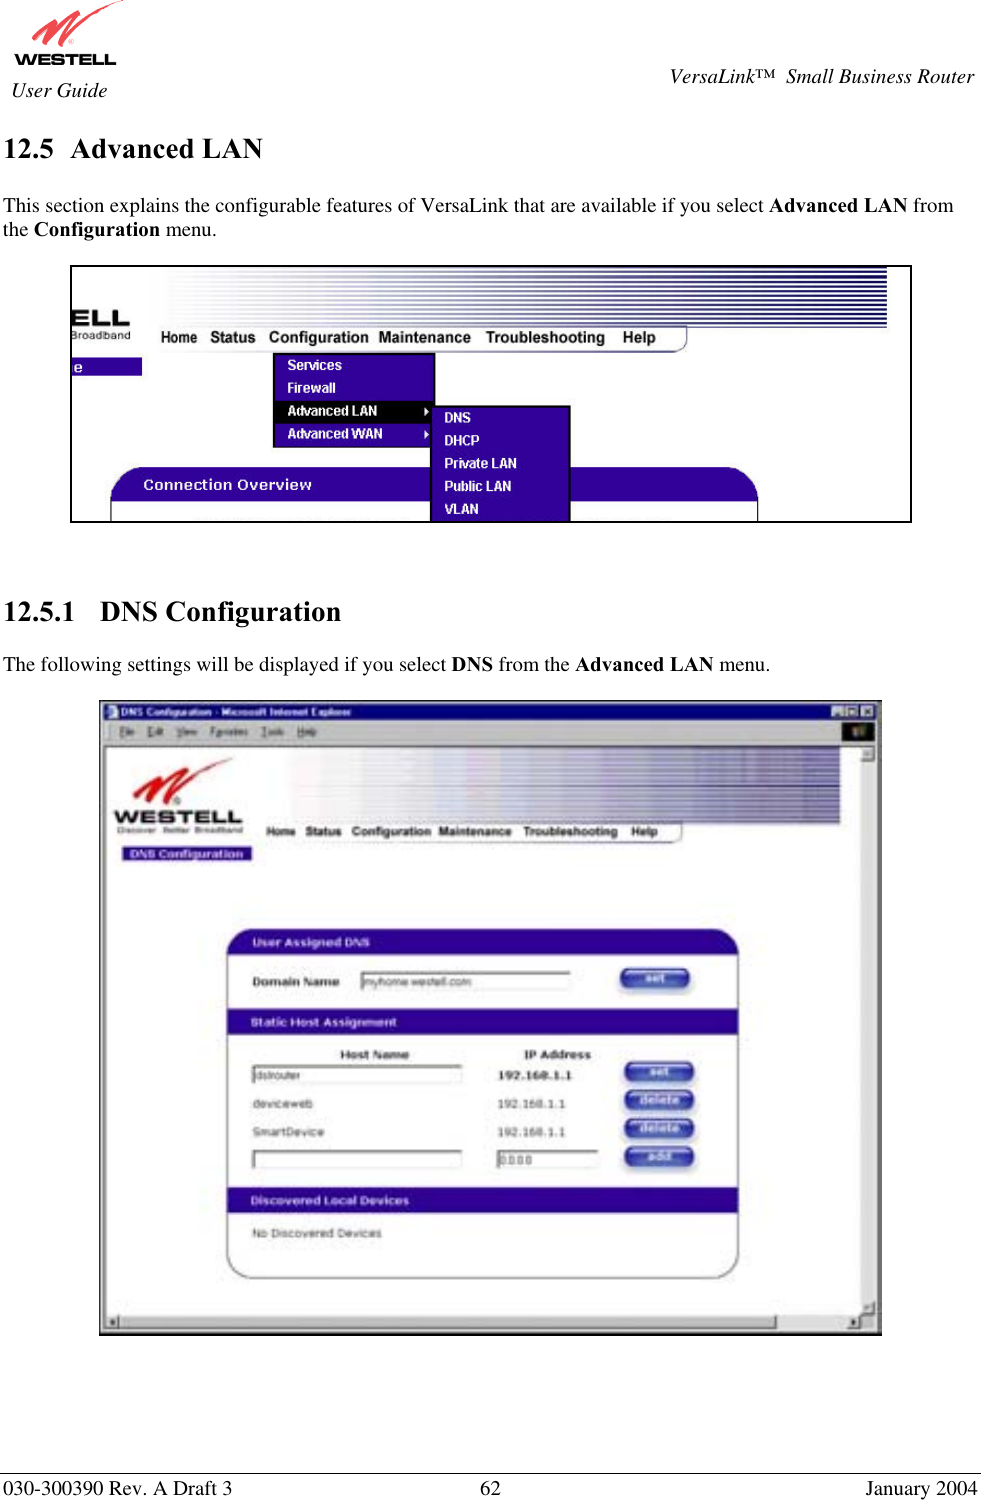       030-300390 Rev. A Draft 3  62  January 2004  VersaLink™  Small Business Router  User Guide 12.5  Advanced LAN  This section explains the configurable features of VersaLink that are available if you select Advanced LAN from the Configuration menu.      12.5.1    DNS Configuration  The following settings will be displayed if you select DNS from the Advanced LAN menu.        